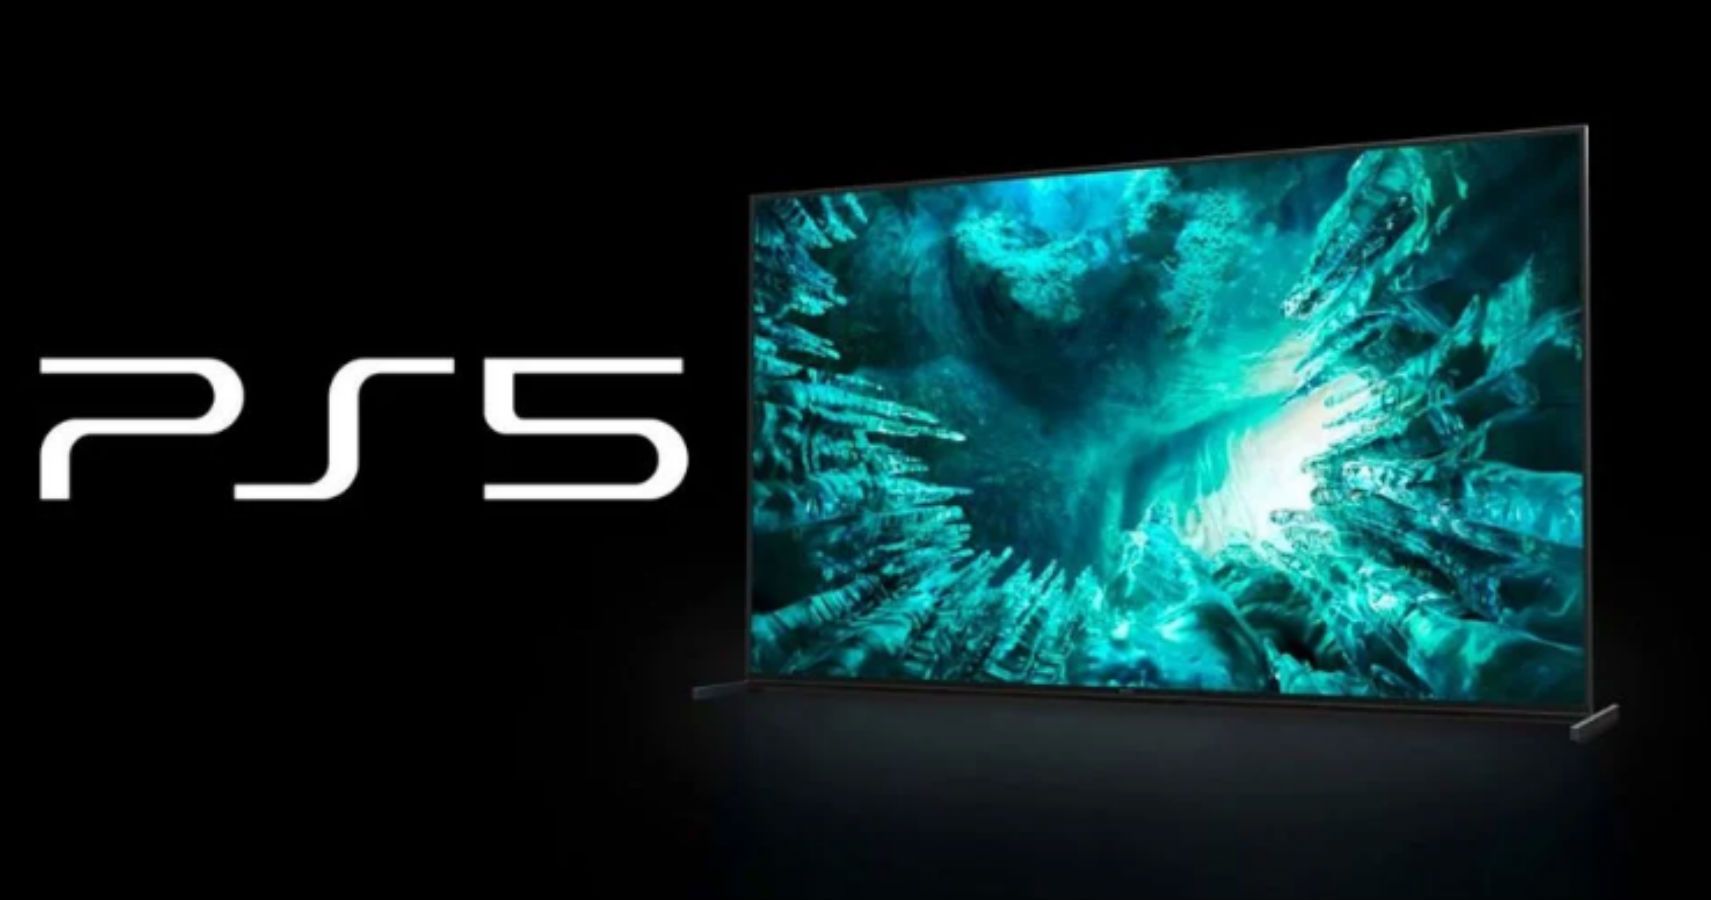 sony ready for playstation 5 tvs